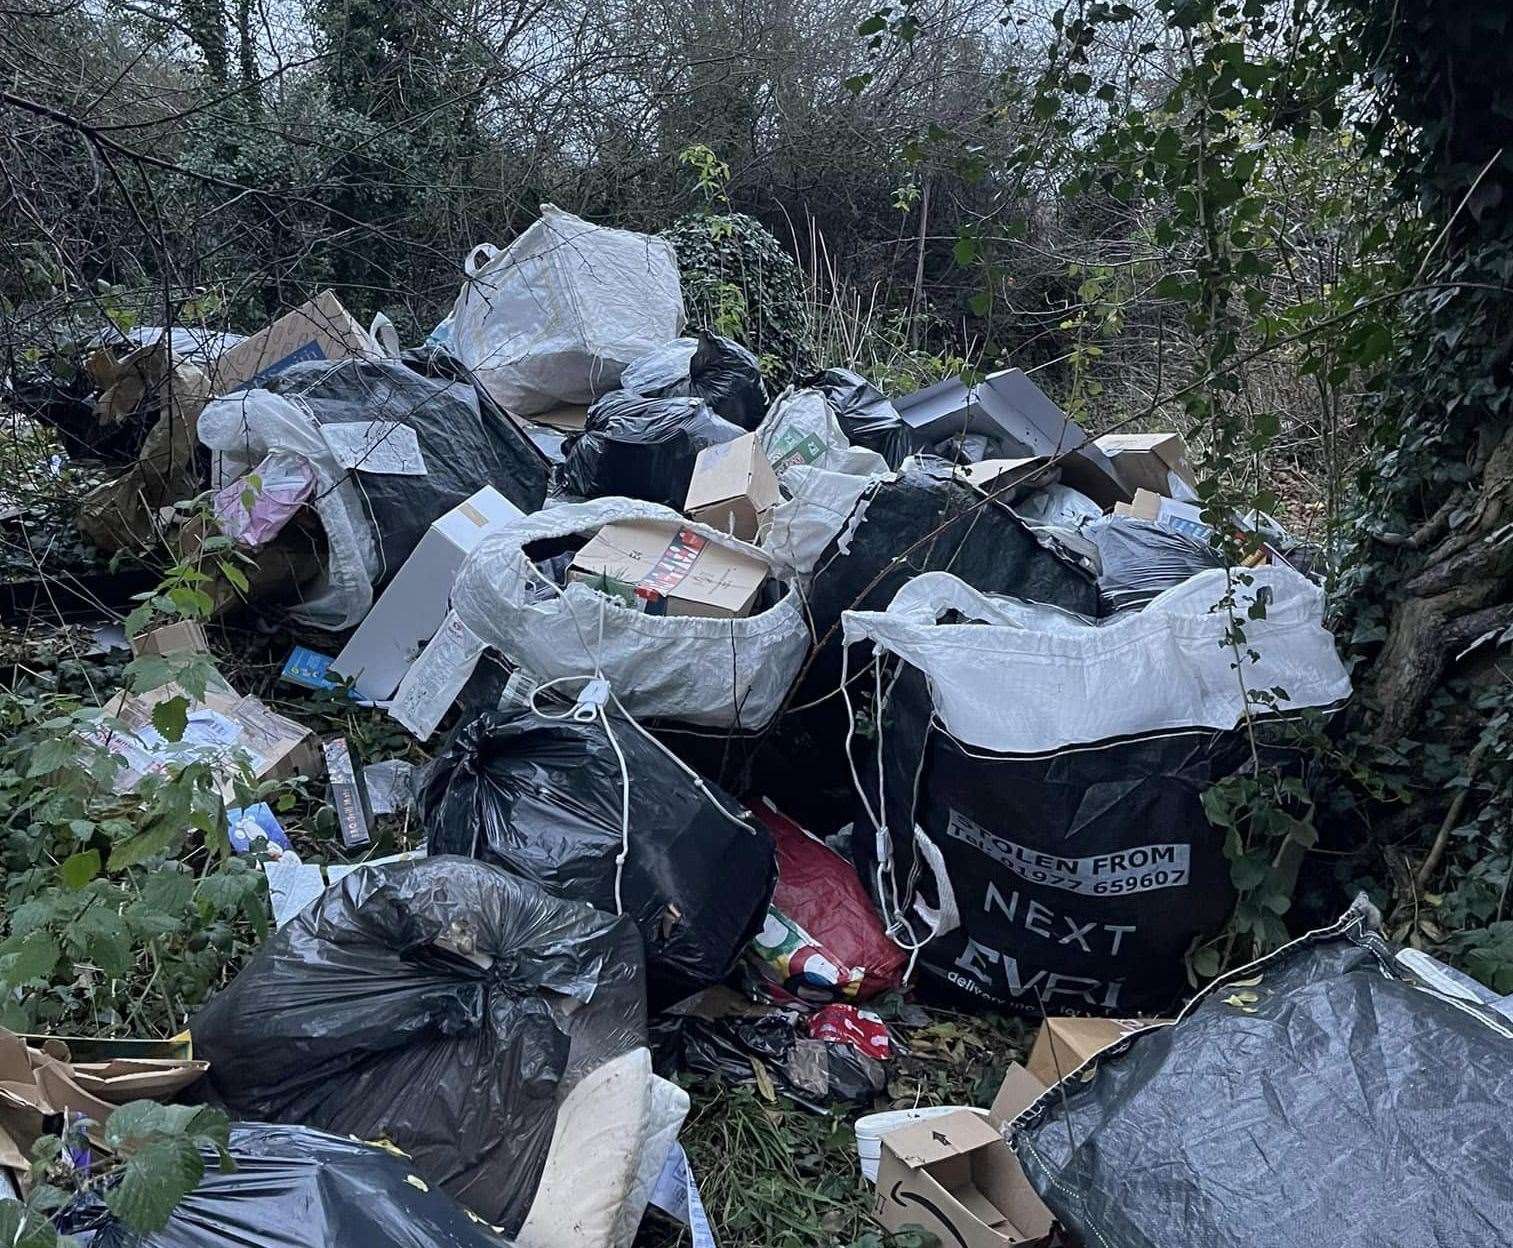 An investigation has been launched after several Evri parcels were found dumped at the end of Beacon Lane, Chatham, last month. Picture: Wayne Coveney